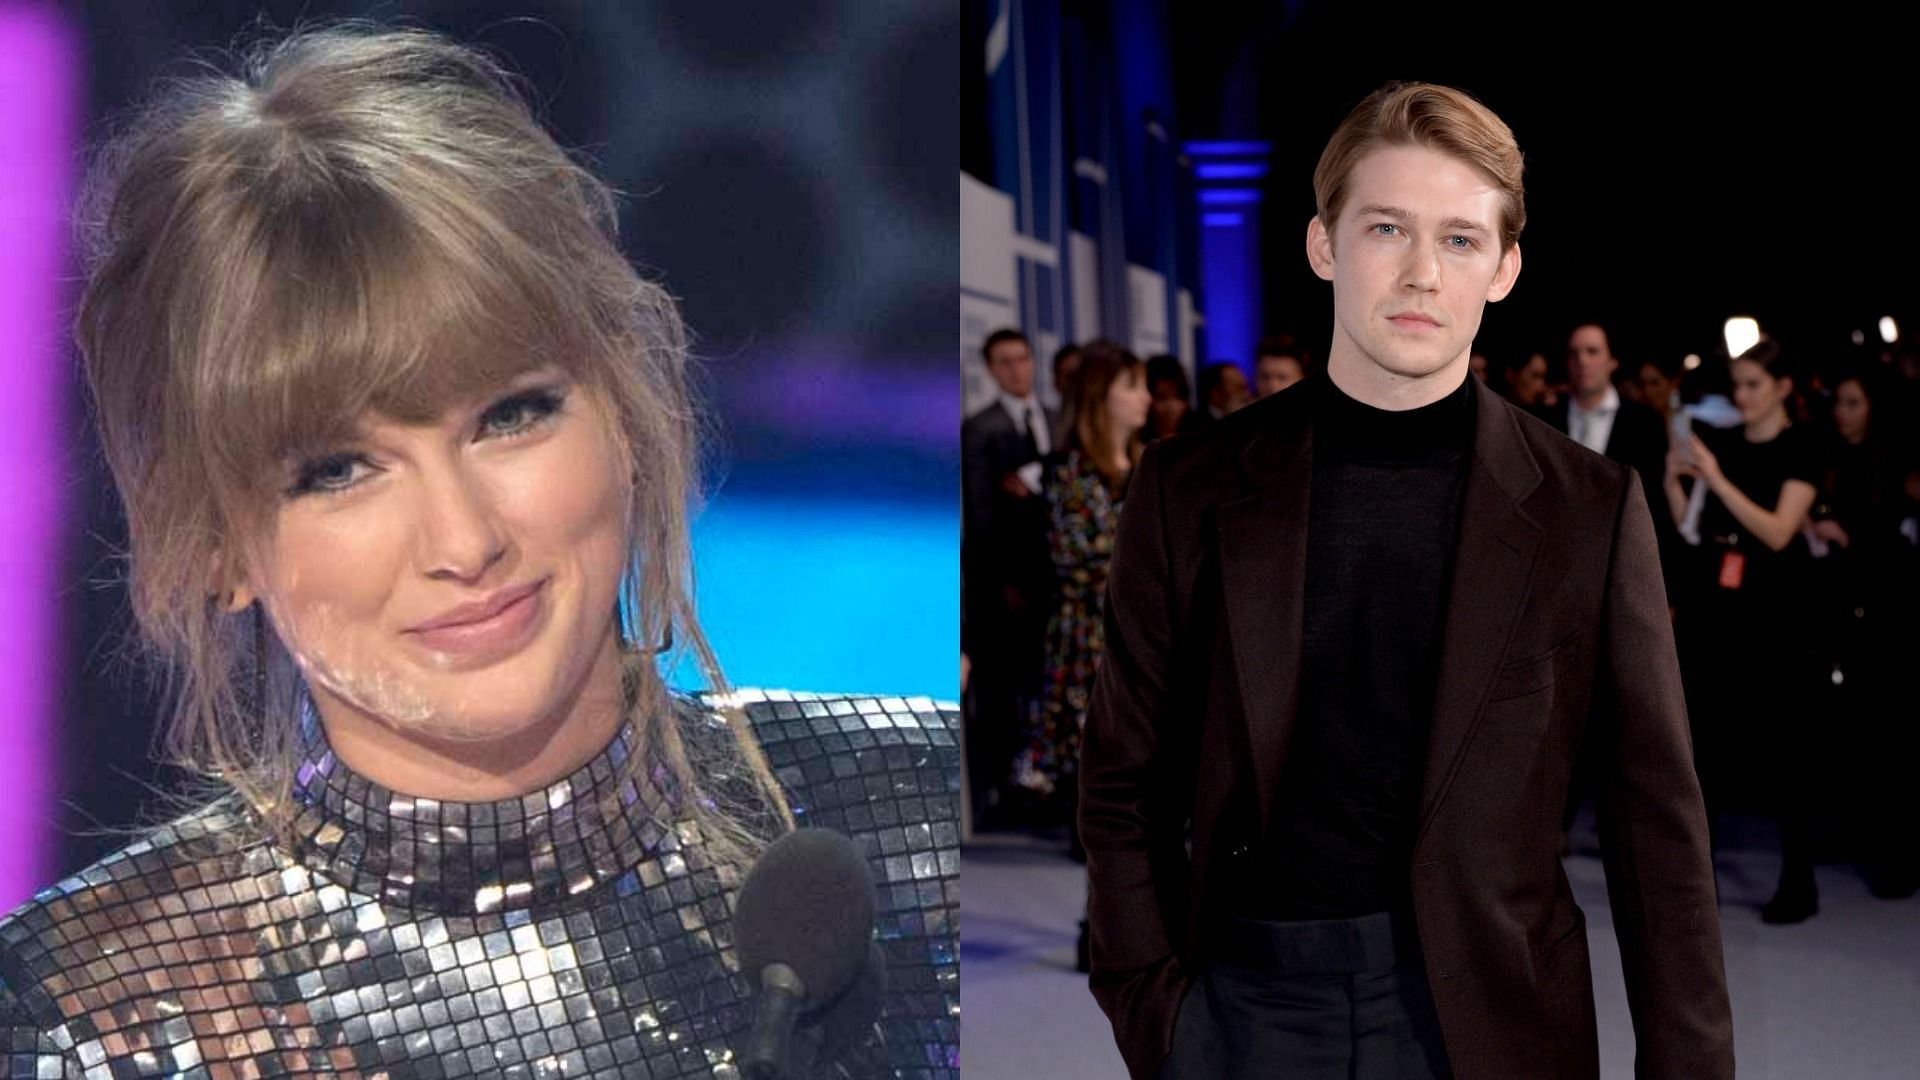 Dating taylor swift Who is